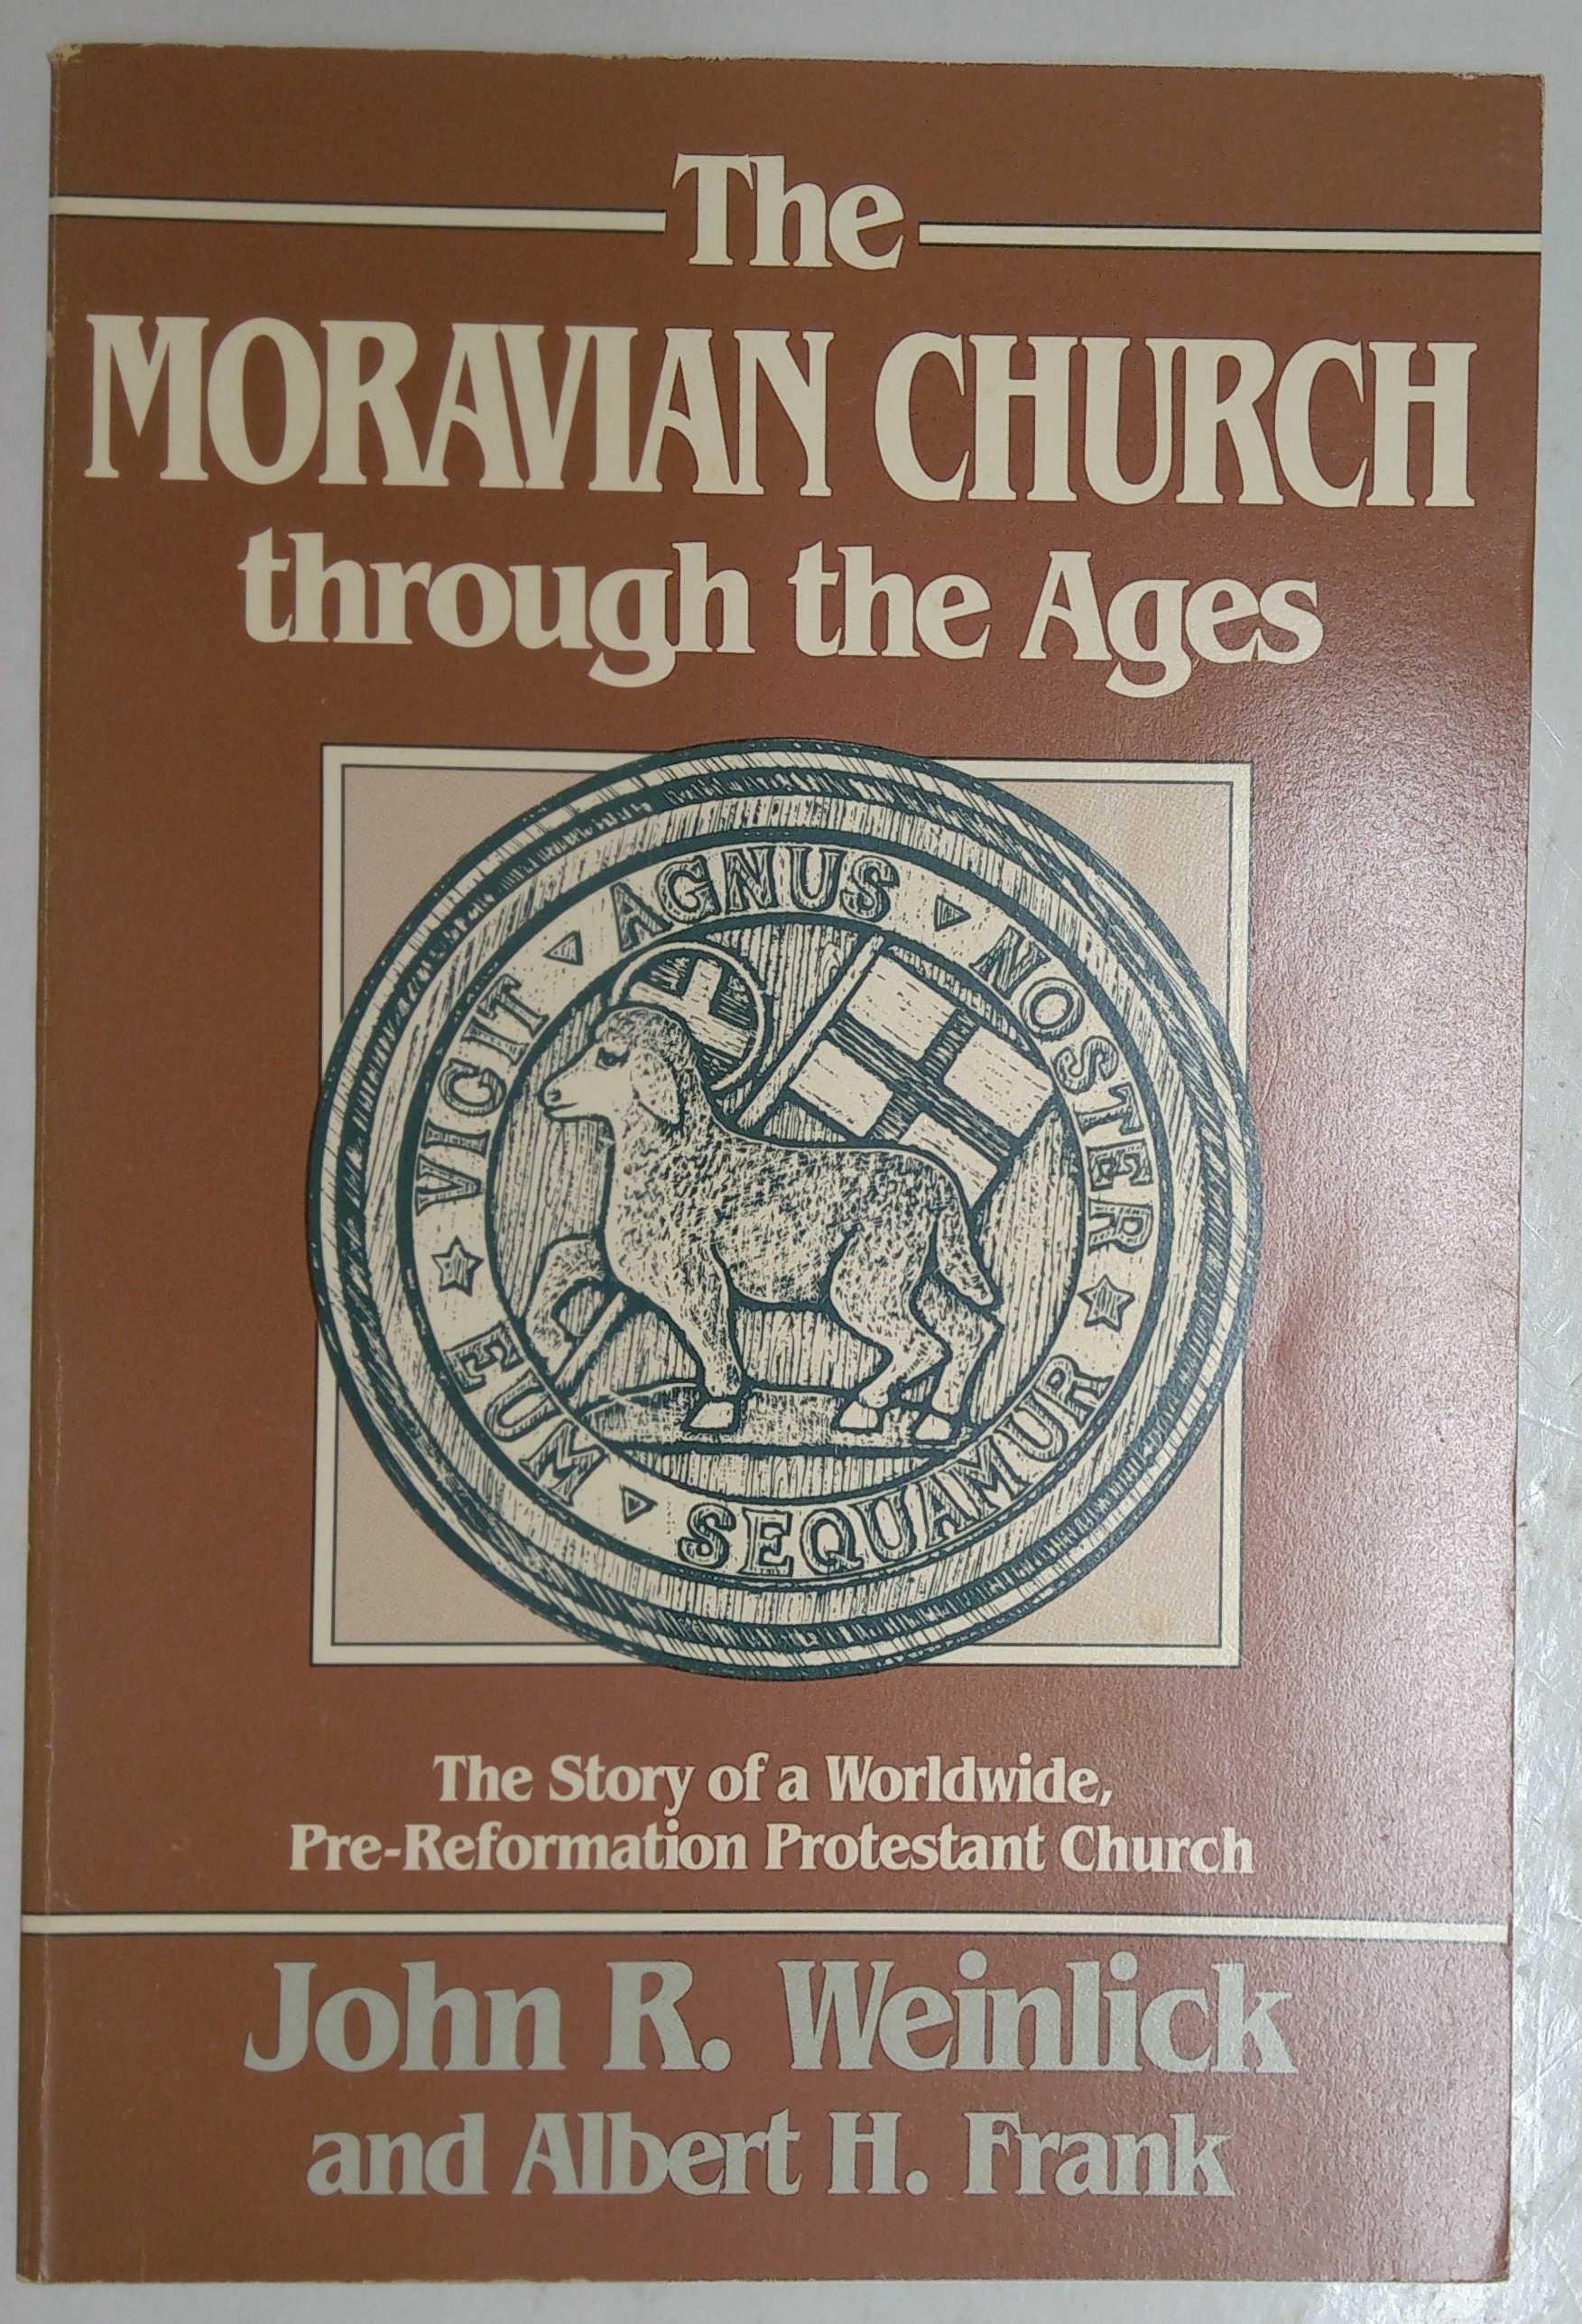 Church　Ages　Church　Soft　Story　Pre-Reformation　Through　Good　by　the　cover　a　H.:　The　Protestant　Albert　Very　R.;　of　John　Worldwide　Weinlick,　Moravian　The　*bibliosophy*　Frank,　(1989)